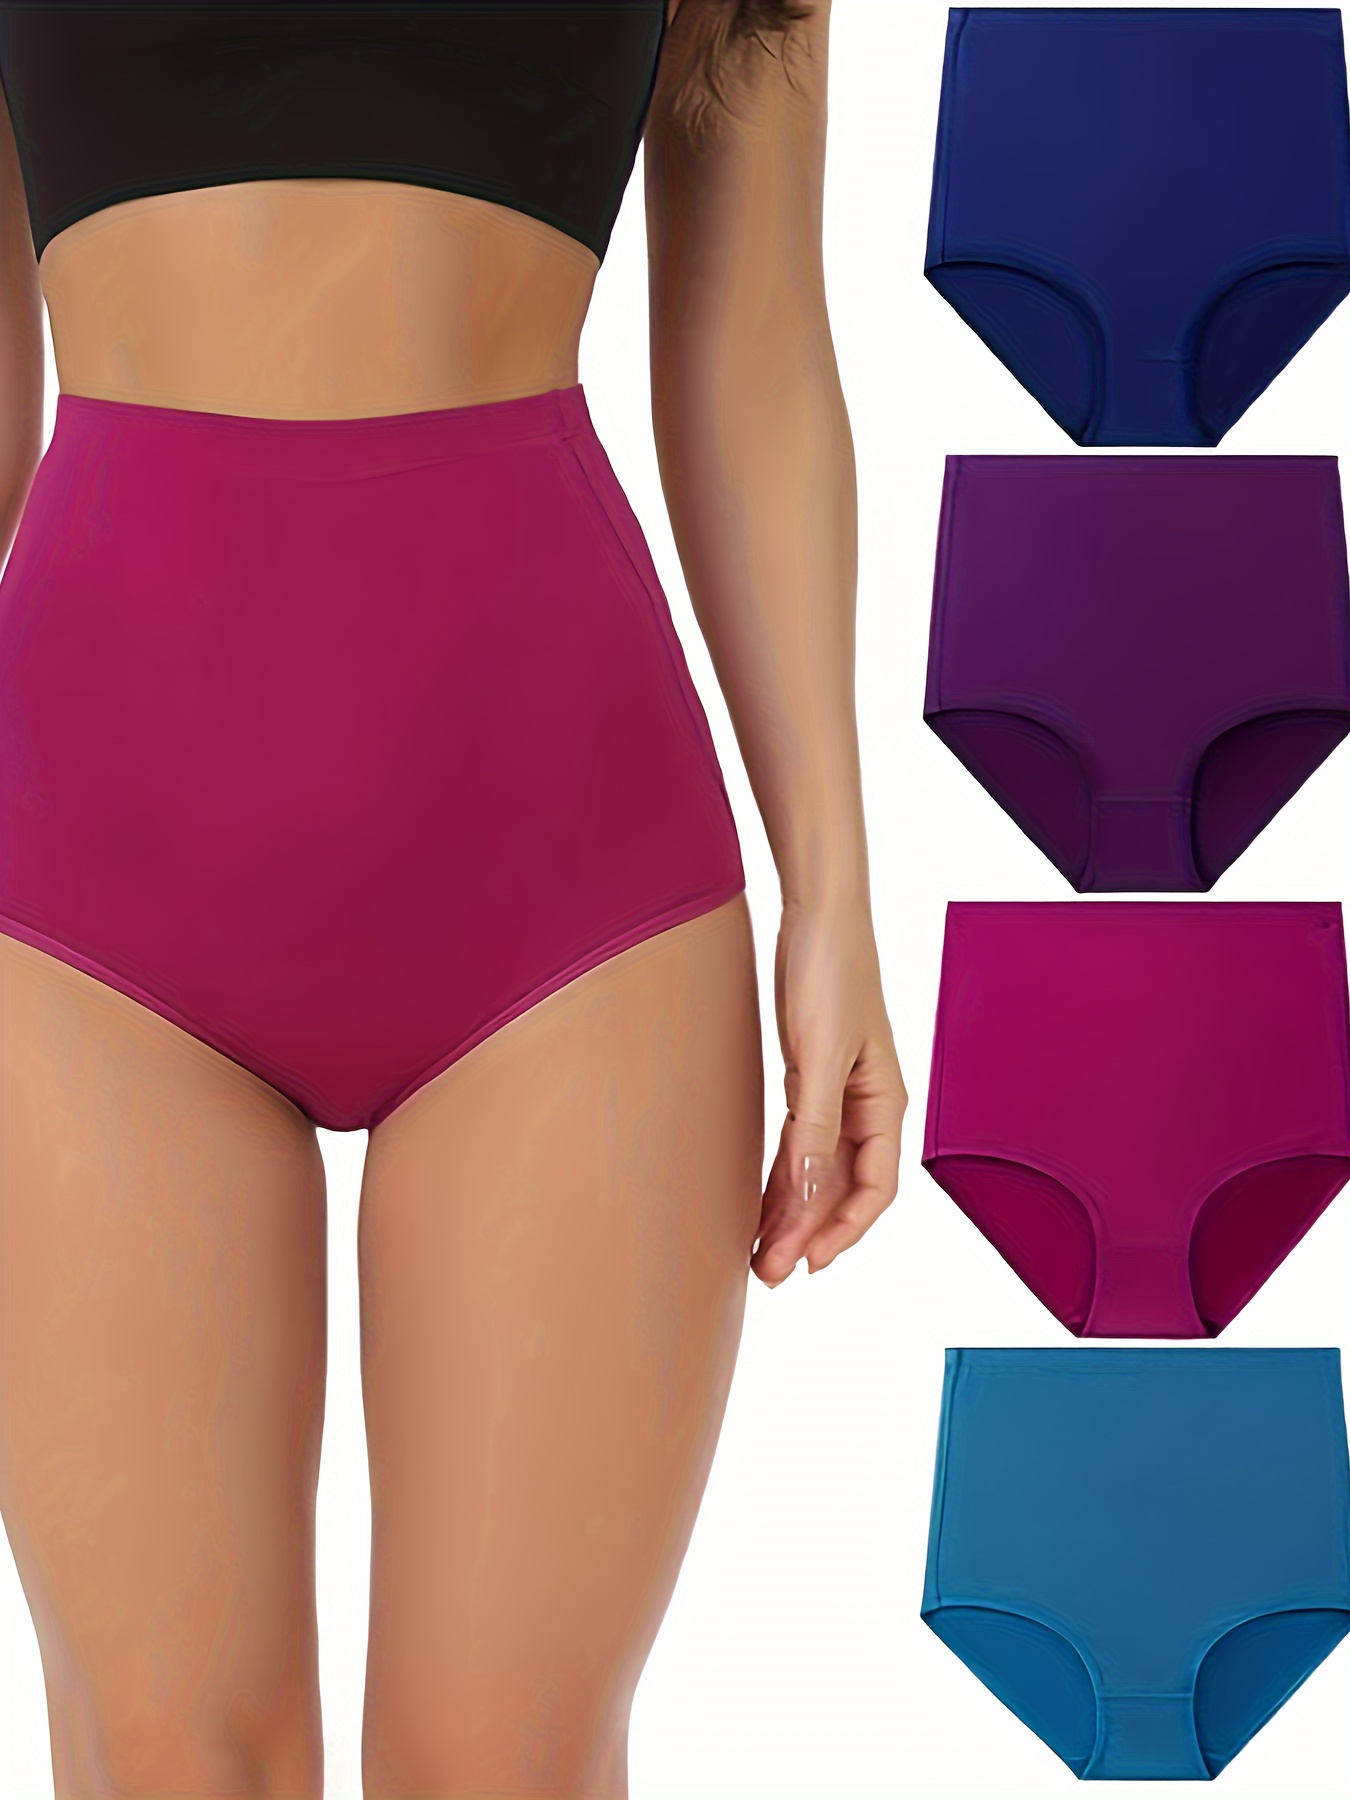  Everdries Leakproof Underwear,Leakproof High Waisted